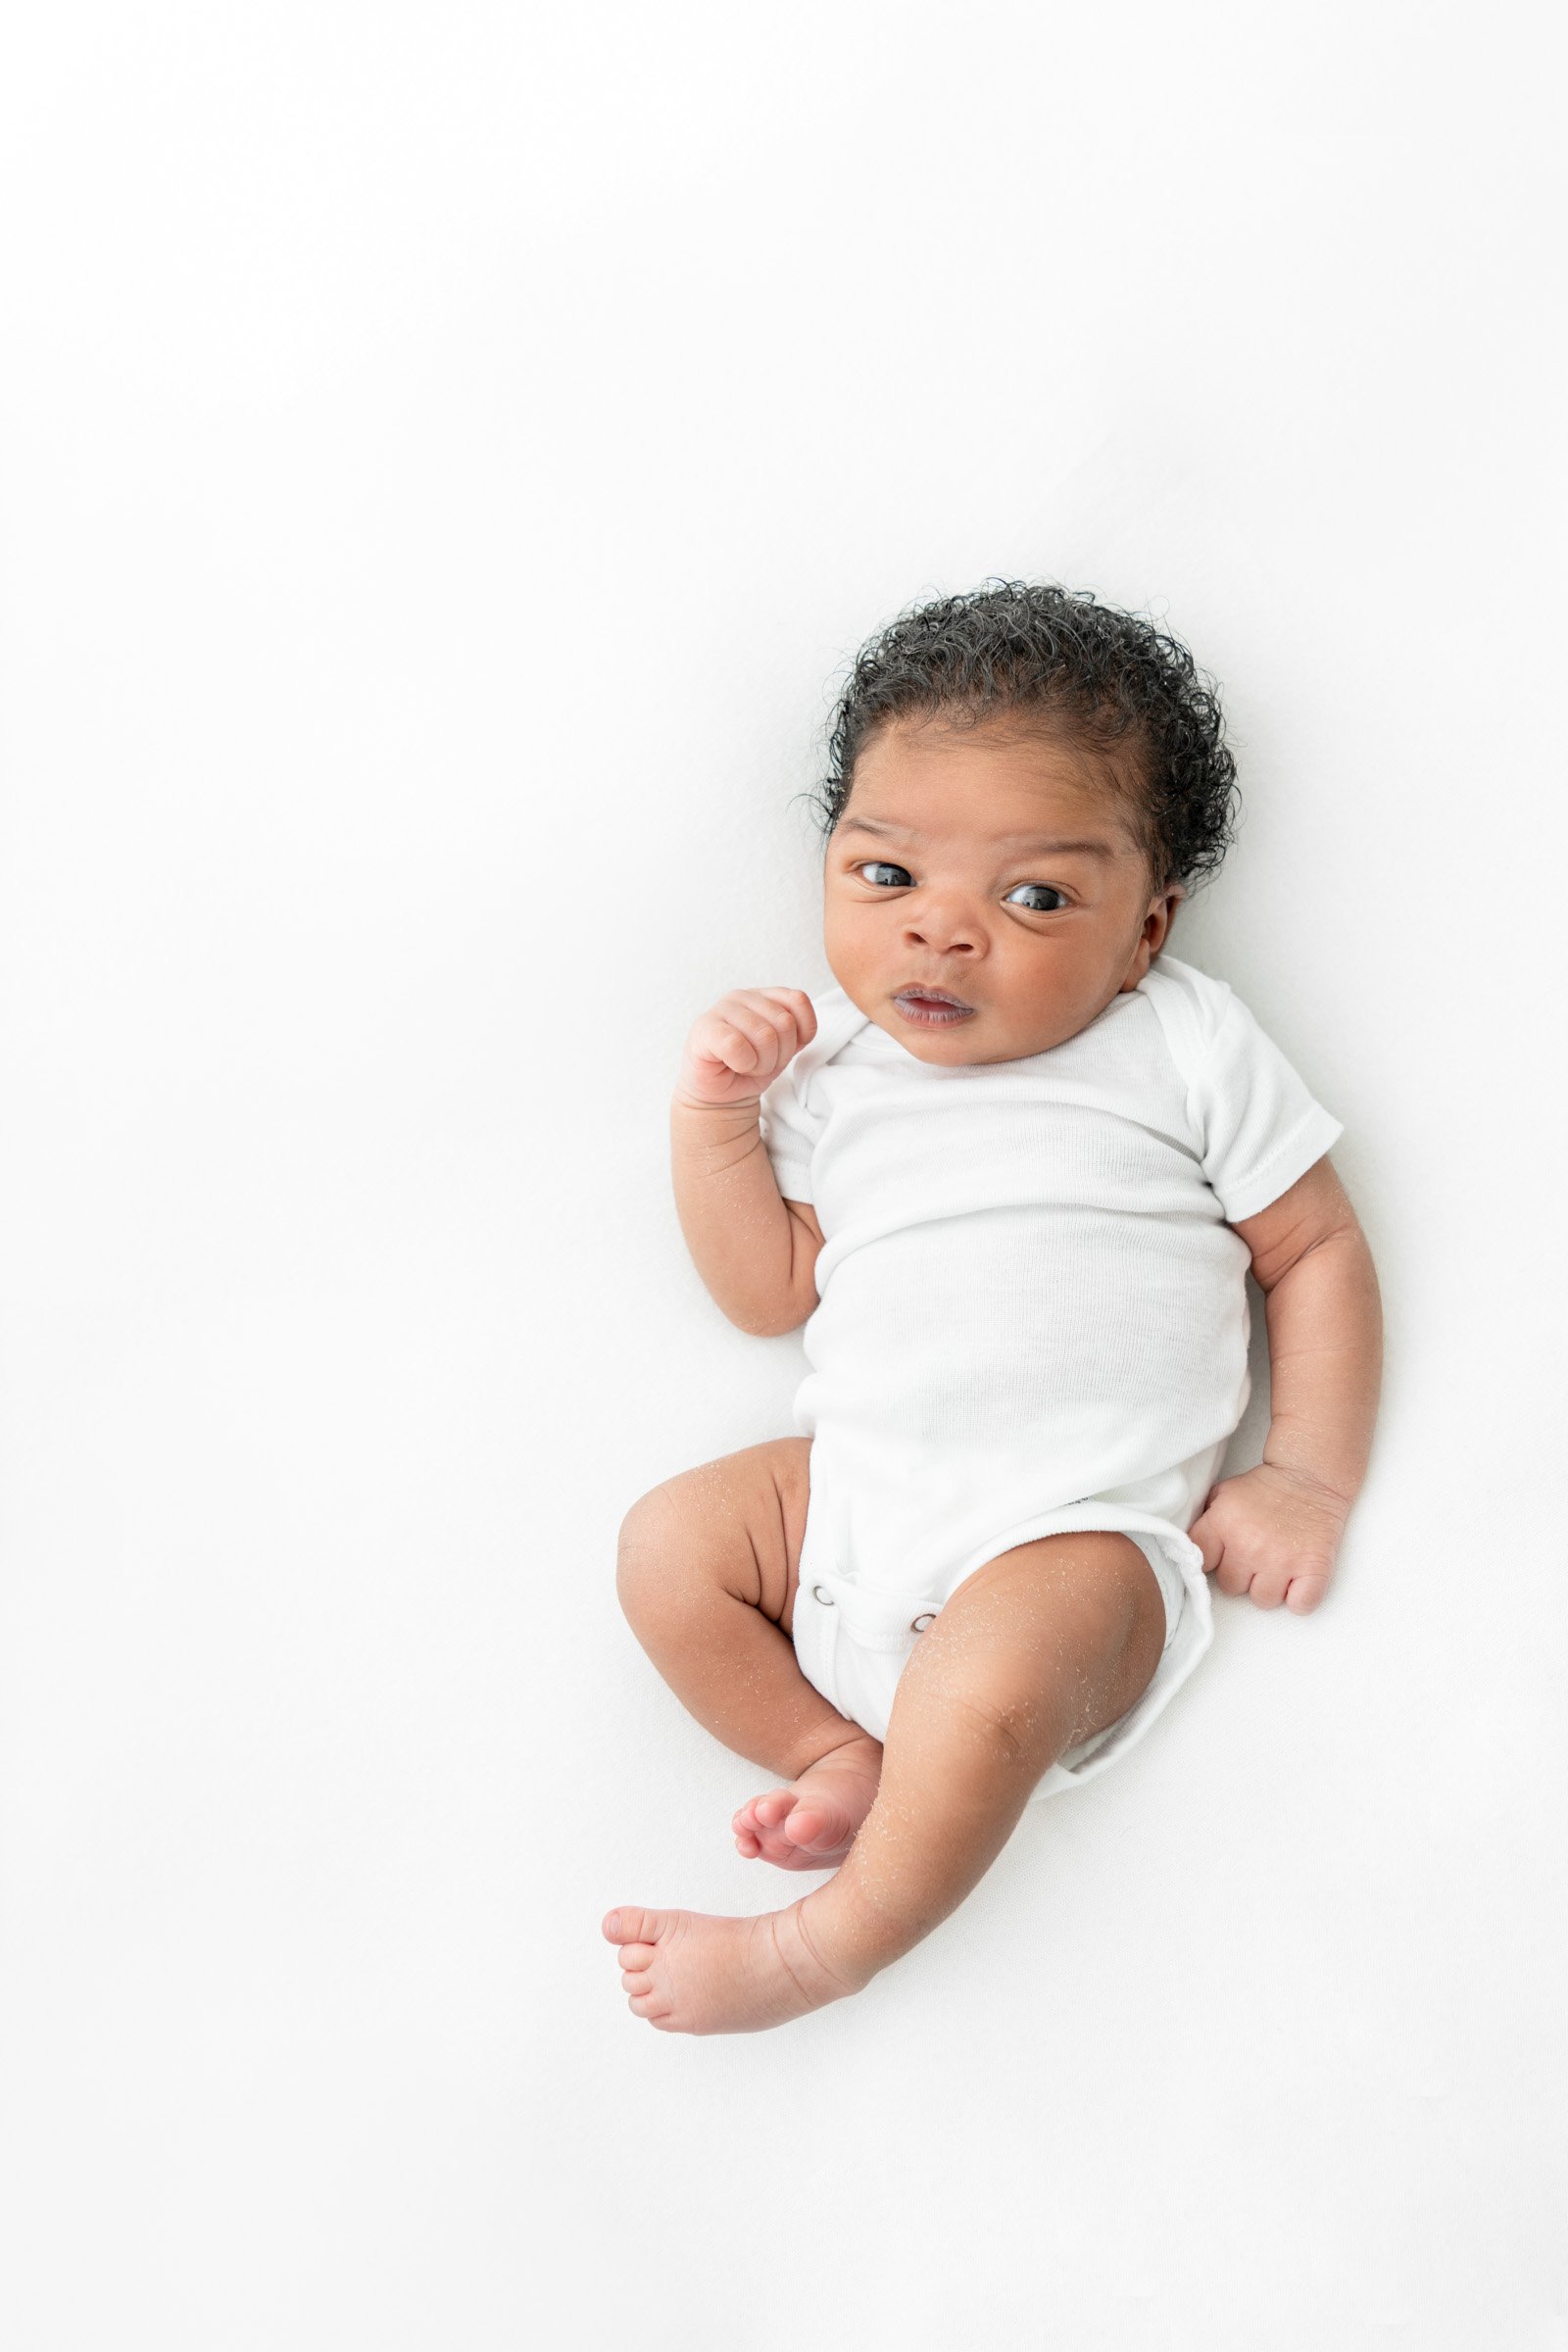  A little man in a white onesie during newborn studio session captured by professional photographer Nicole Hawkins Photography. NJ Photographer #nicolehawkinsphotography #NJbabyphotography #newbornportraits #NewJerseyStudioPhotography #newbornsession